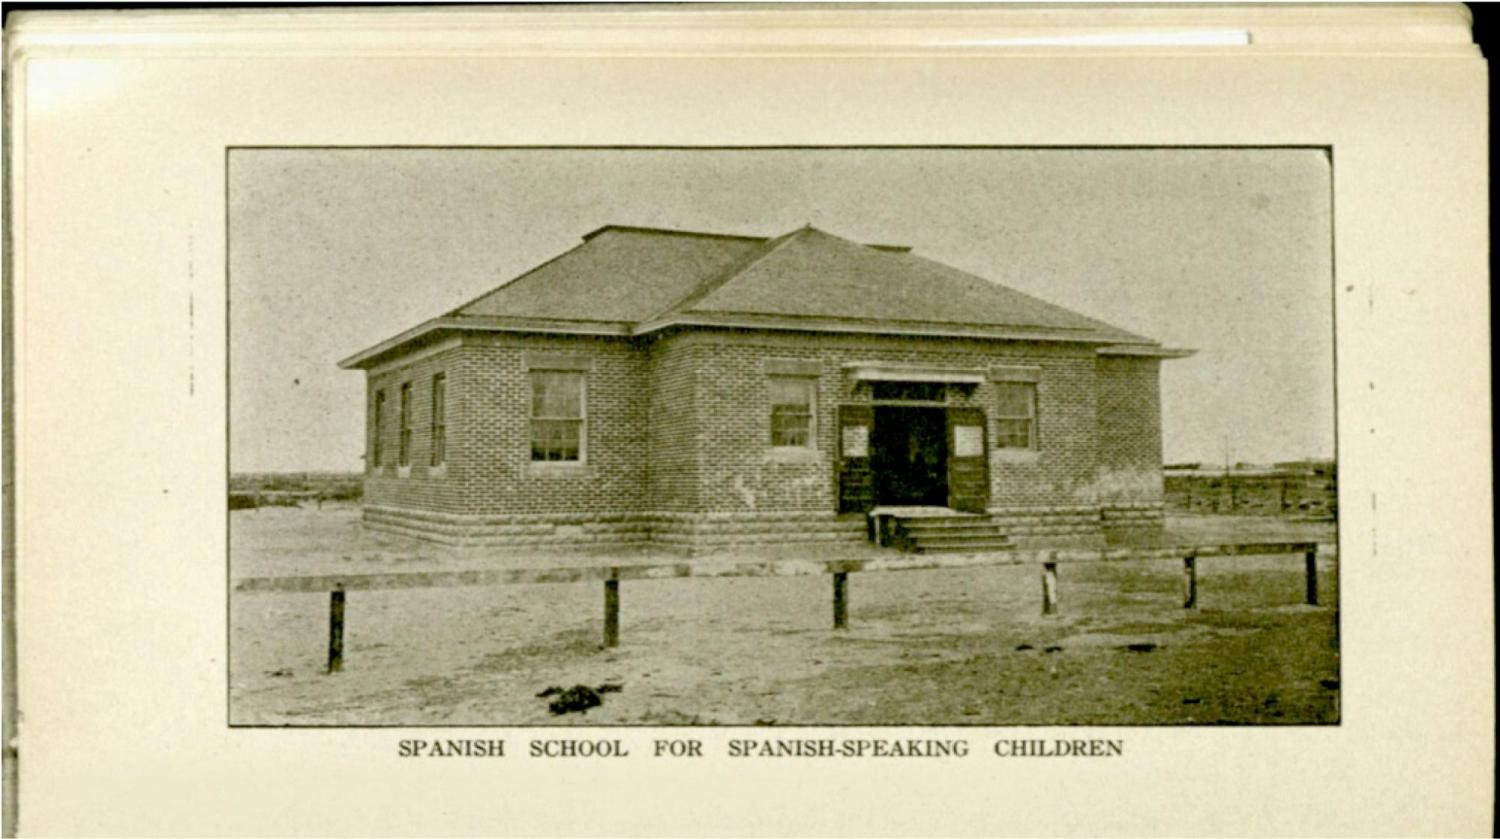 The “Mexican School” in Alamosa